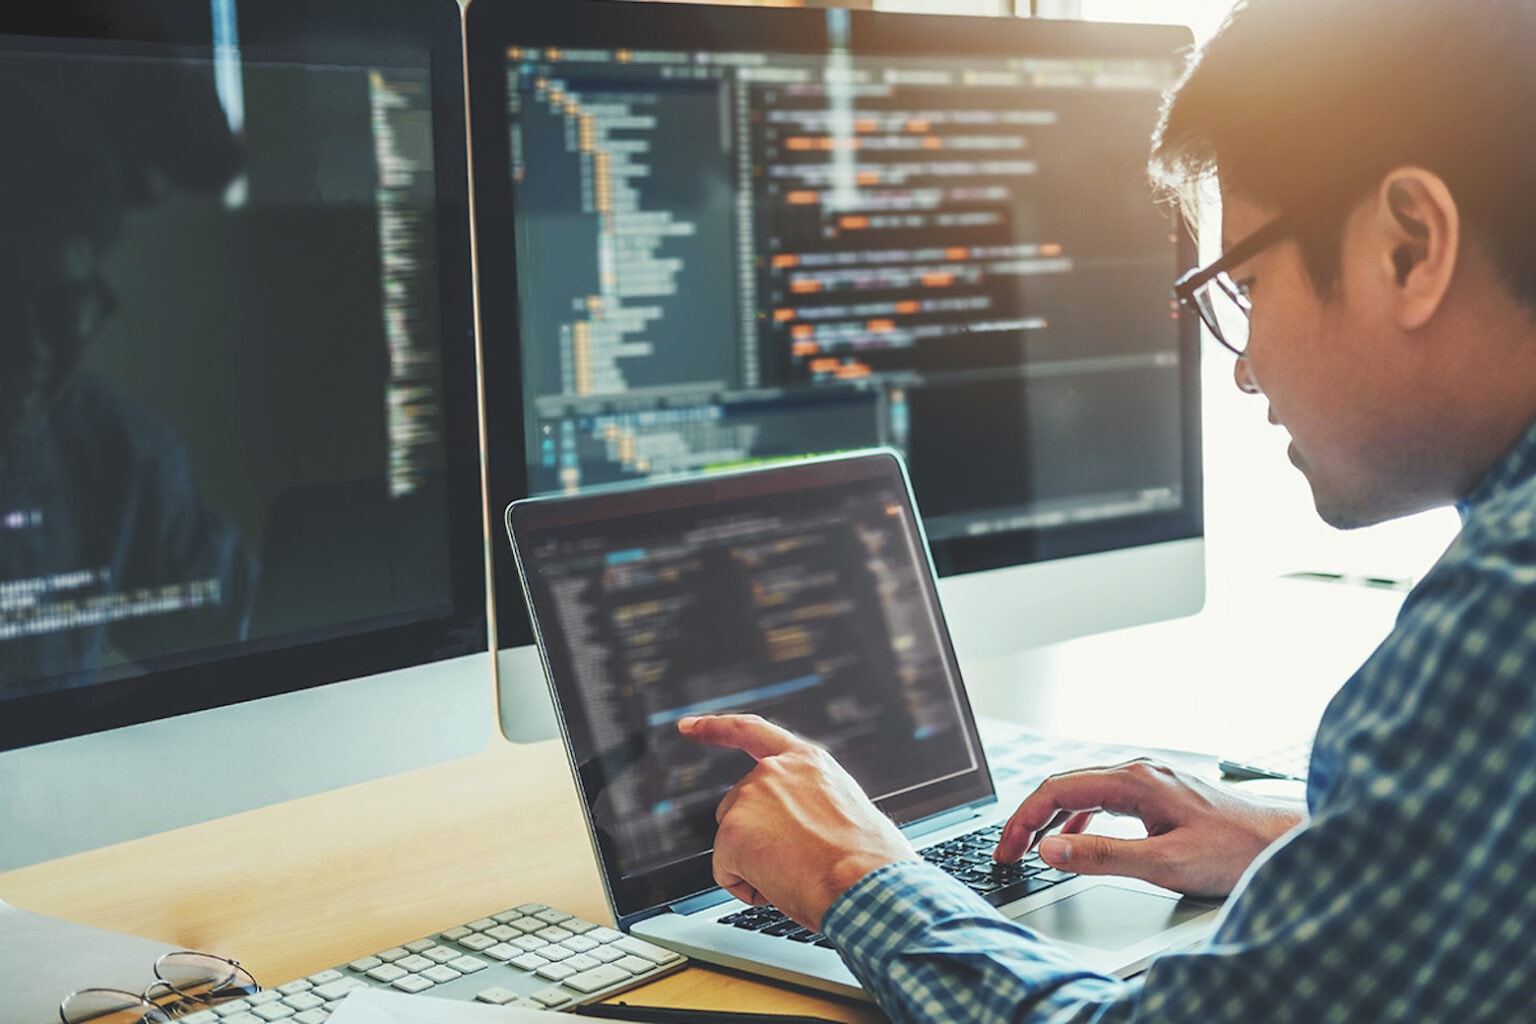 This course is perfect to kickstart your coding career